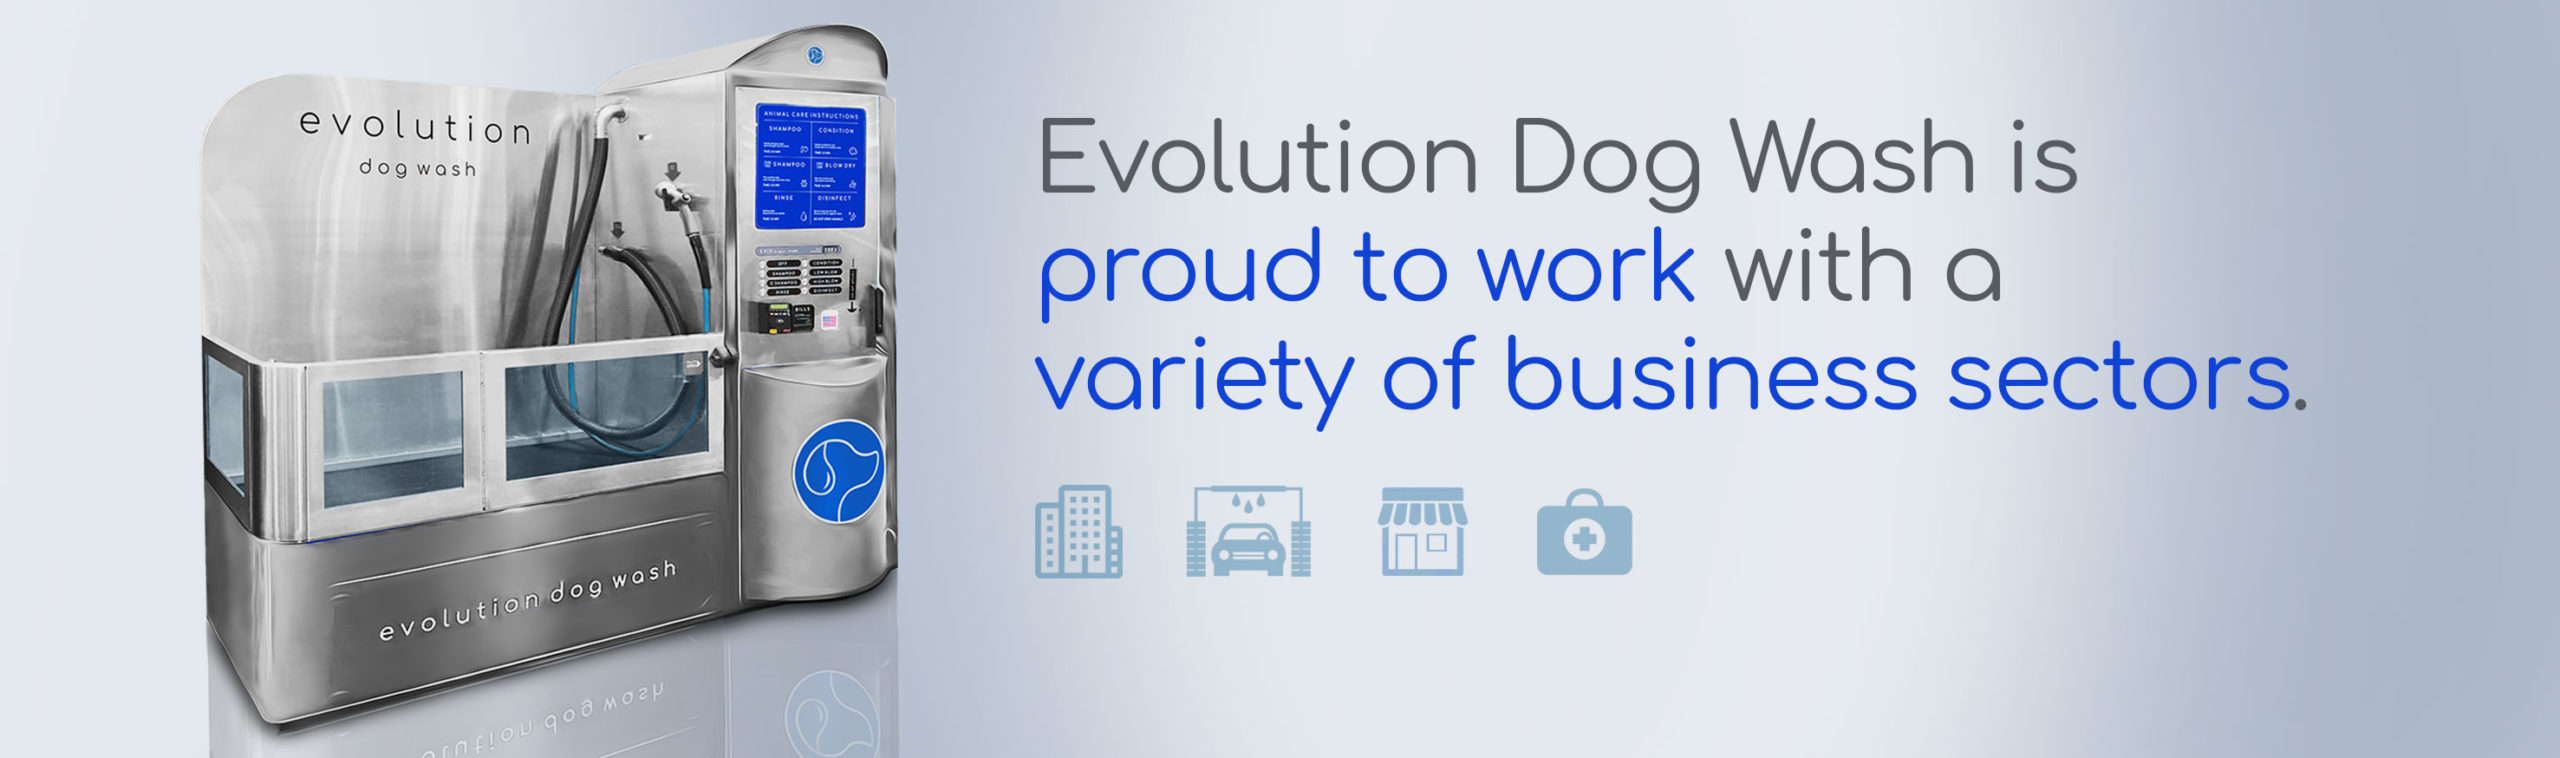 Evolution Dog Wash is proud to work with a variety of business sectors.